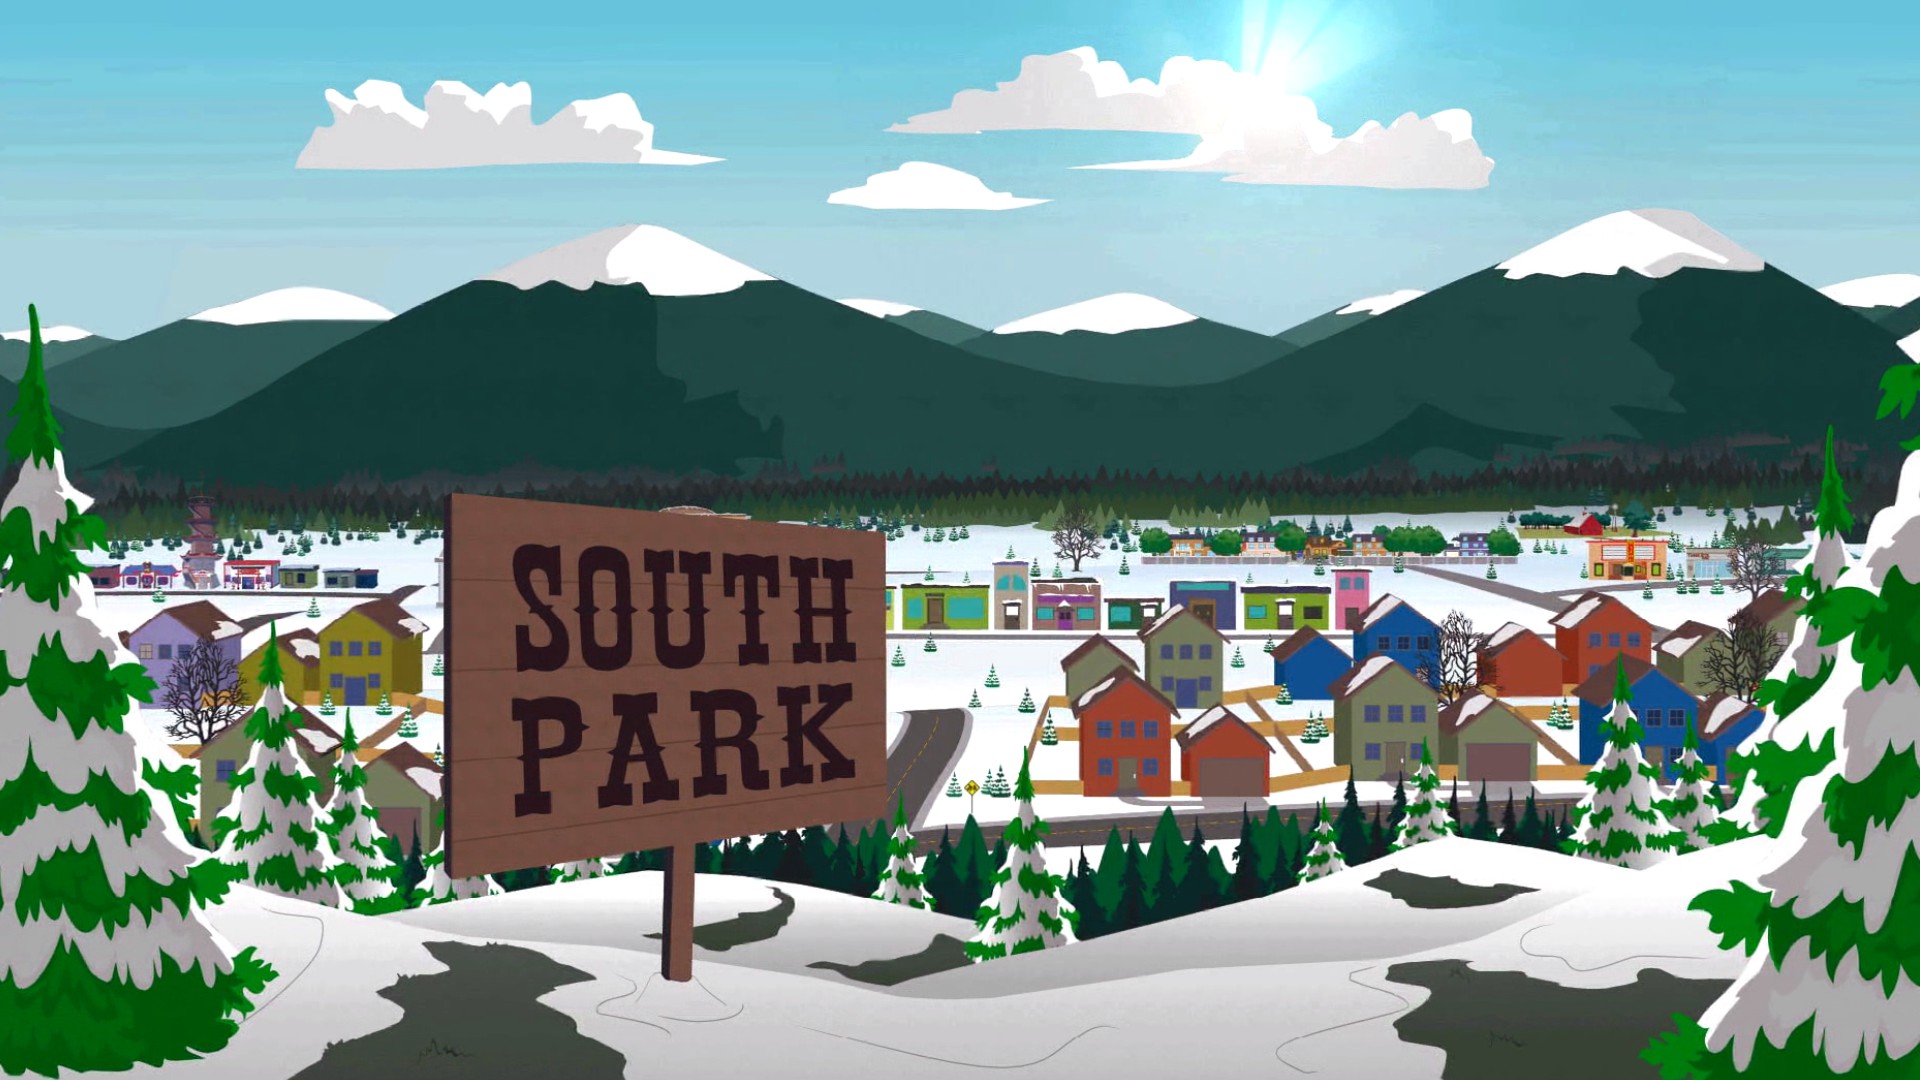 General 1920x1080 South Park: The Stick Of Truth South Park video games cartoon screen shot video game landscape PC gaming